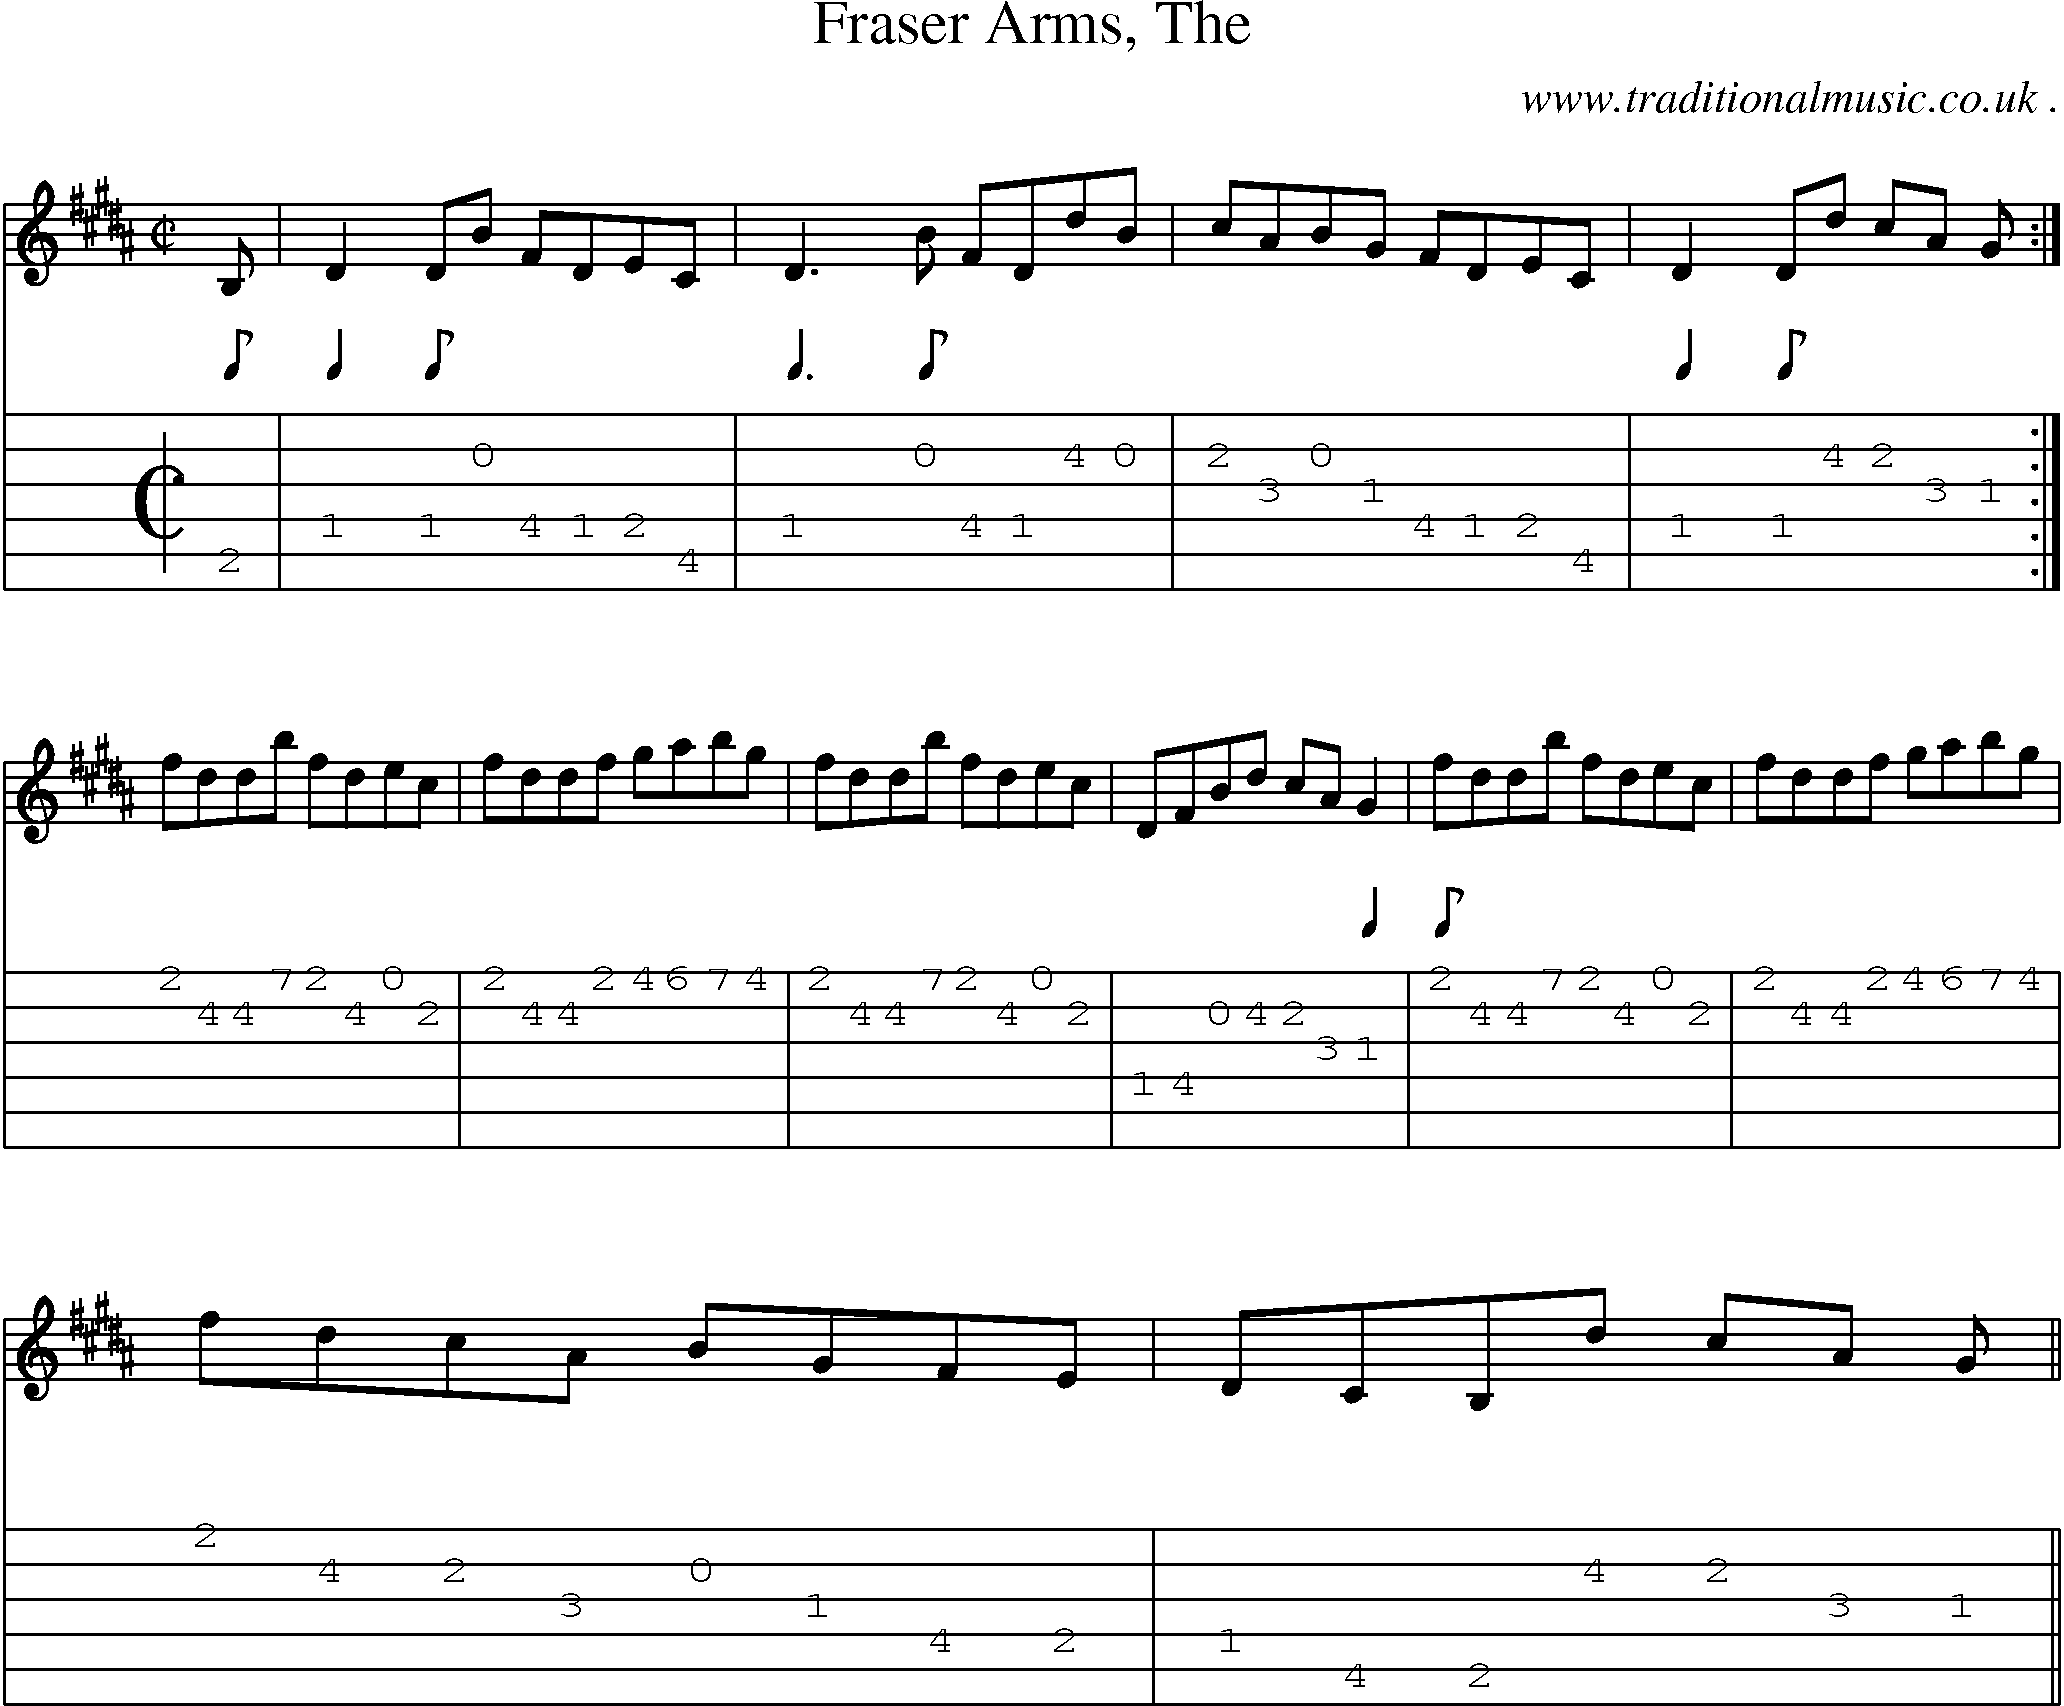 Sheet-music  score, Chords and Guitar Tabs for Fraser Arms The